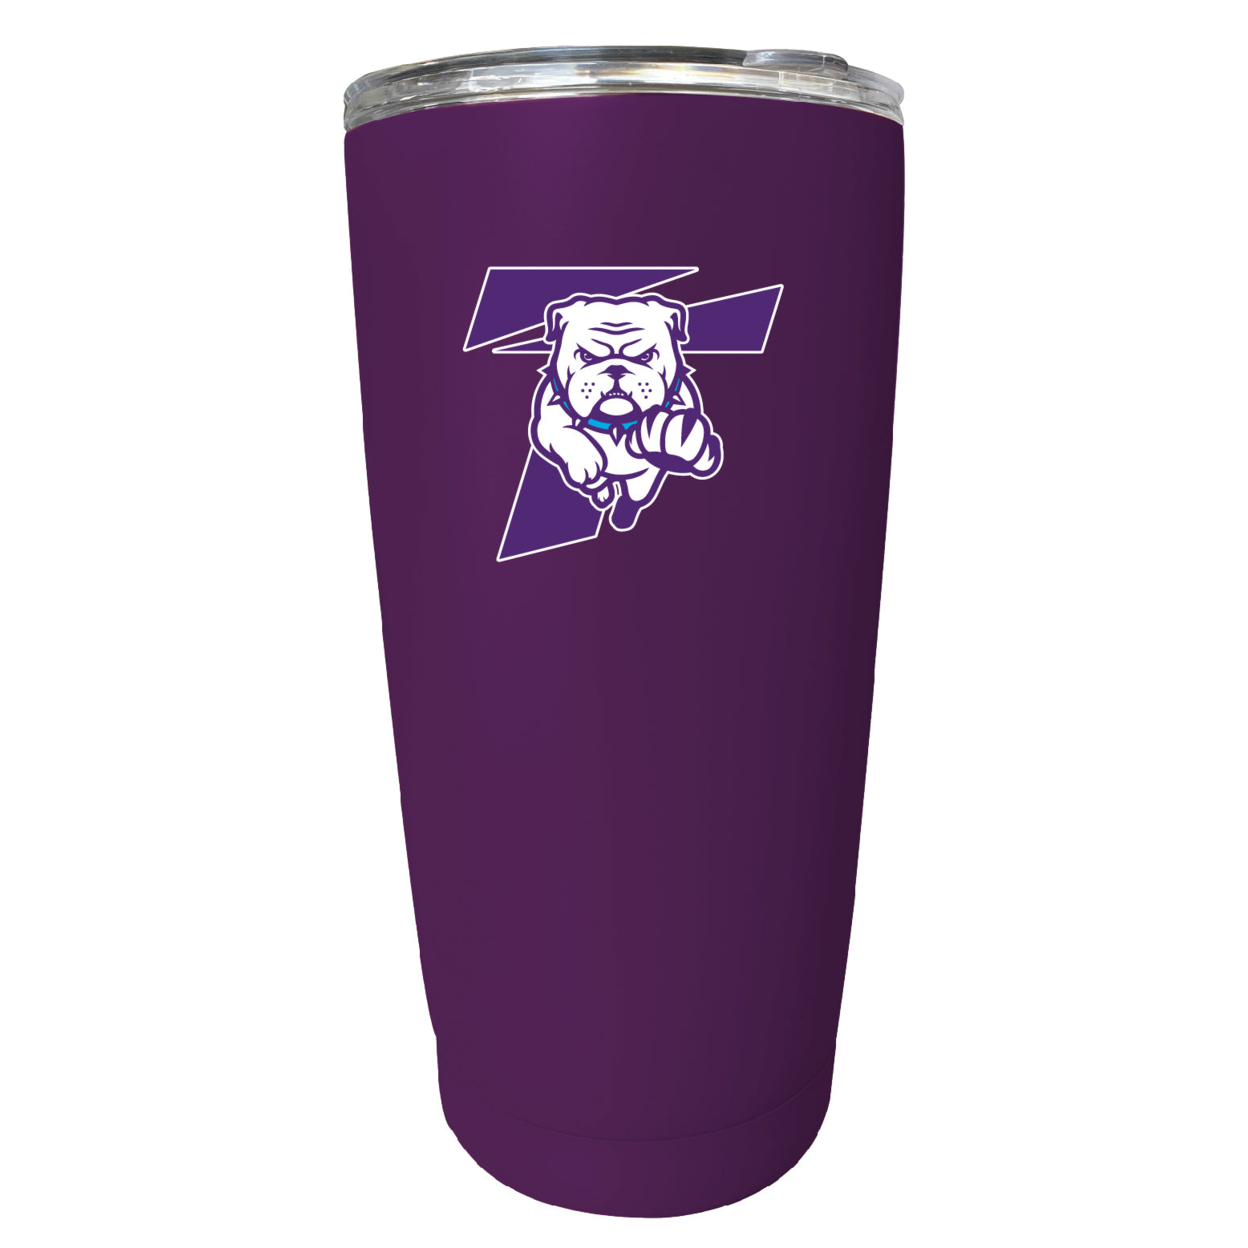 Truman State University 16 Oz Stainless Steel Insulated Tumbler - Purple